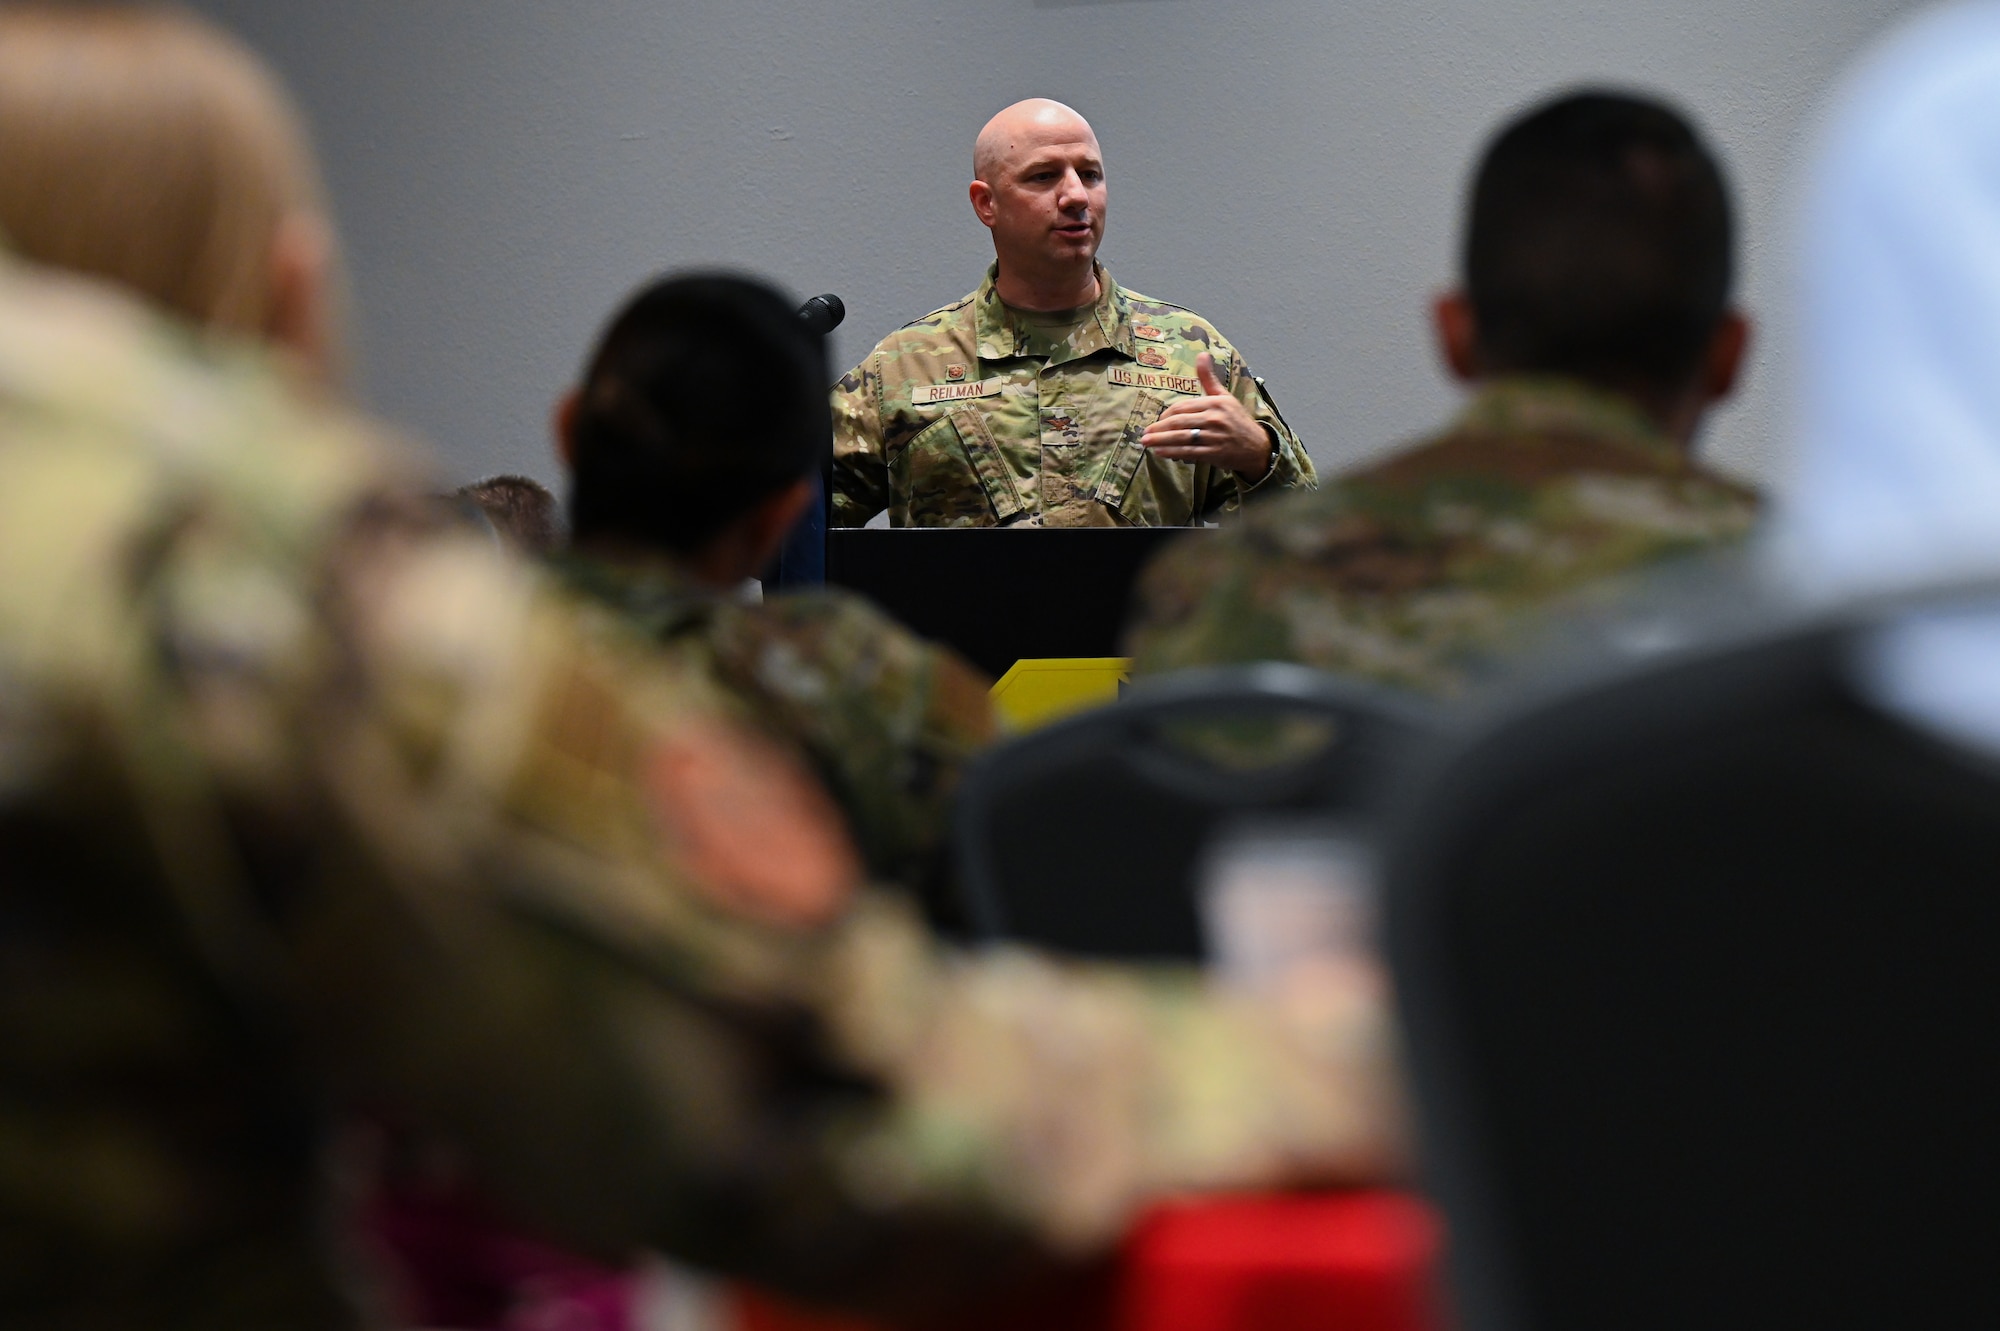 U.S. Air Force Col. Matthew Reilman, 17th Training Wing commander, speaks to the Senior Leader Summit at the Powell Event Center, Goodfellow Air Force Base, Texas, July 26, 2022. Reilman expressed his desire for leadership to communicate to their units the focus of the wing’s mission, and share best practices to implement the wing vision in every aspect of daily work. (U.S. Air Force photo by Senior Airman Michael Bowman)